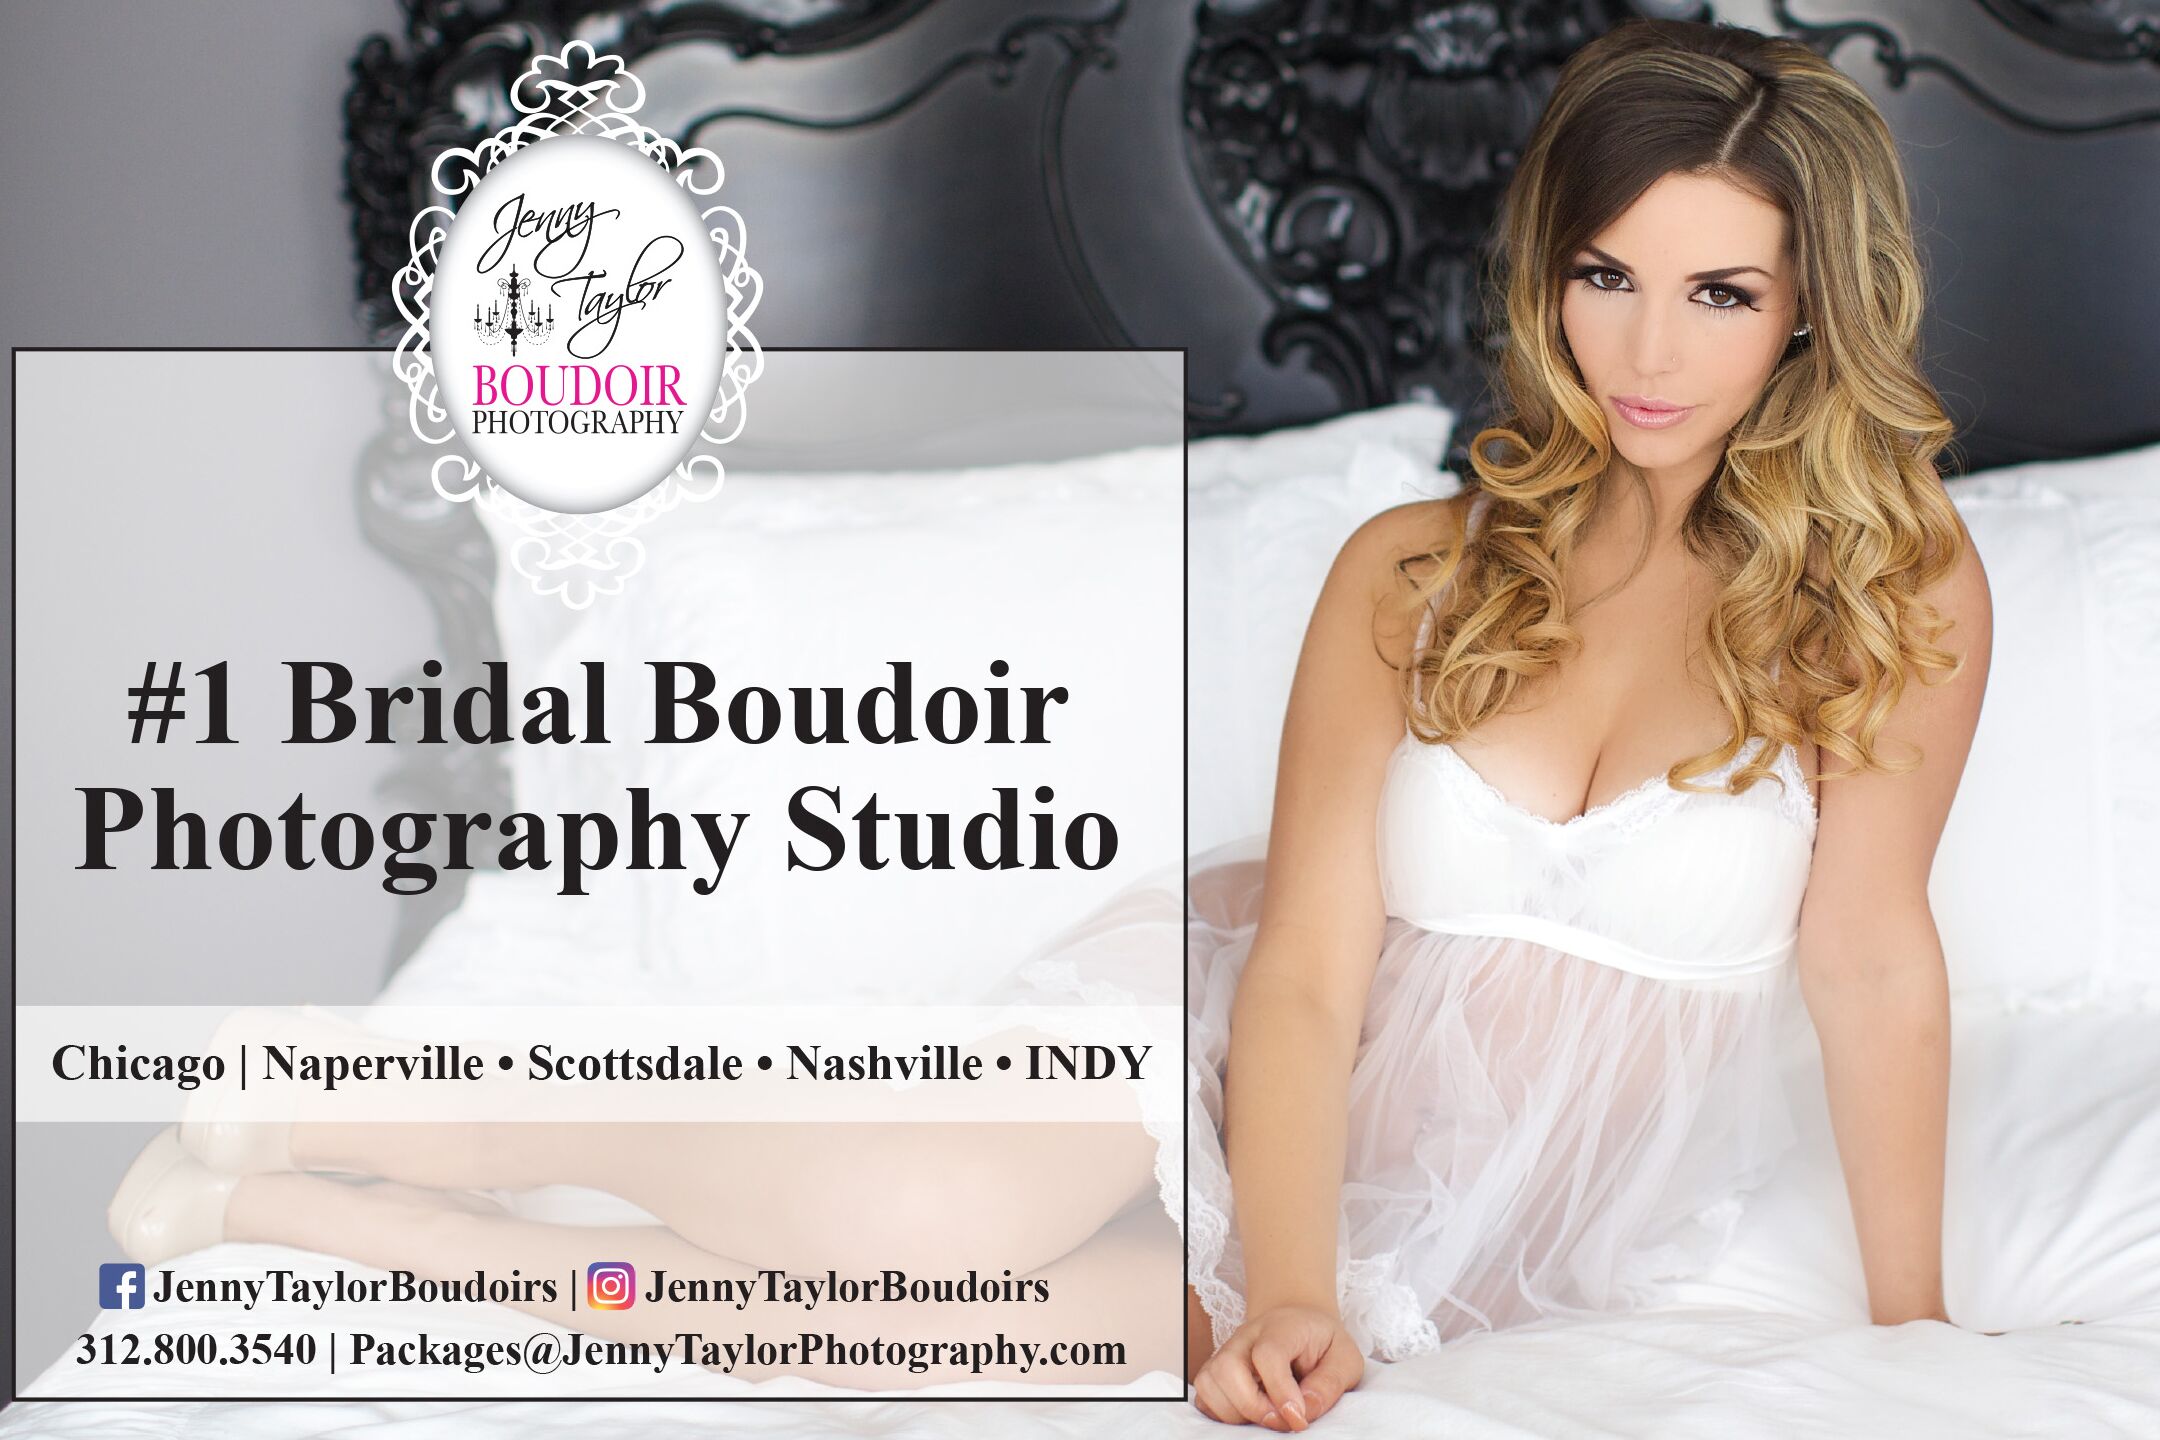 Jenny Taylor Boudoir Photography Chicago and Naperville